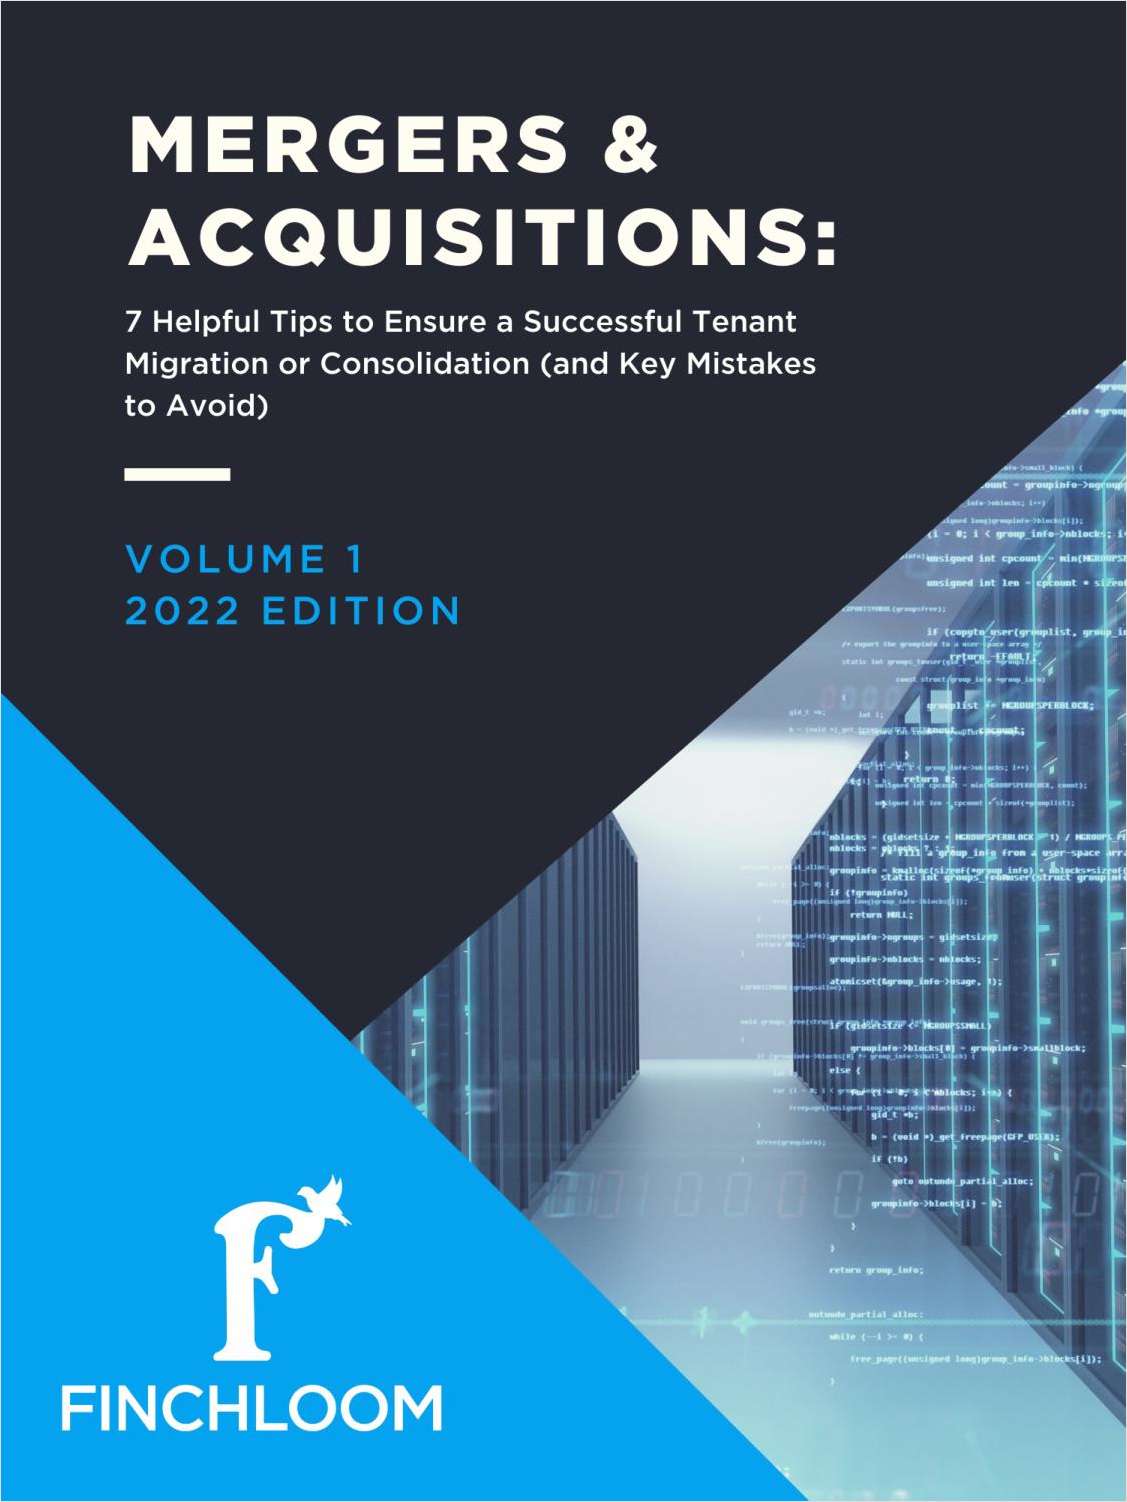 Mergers & Acquisitions: 7 Helpful Tips to Ensure a Succesful Tenant Migration or Consolidation (and Key Mistakes to Avoid)